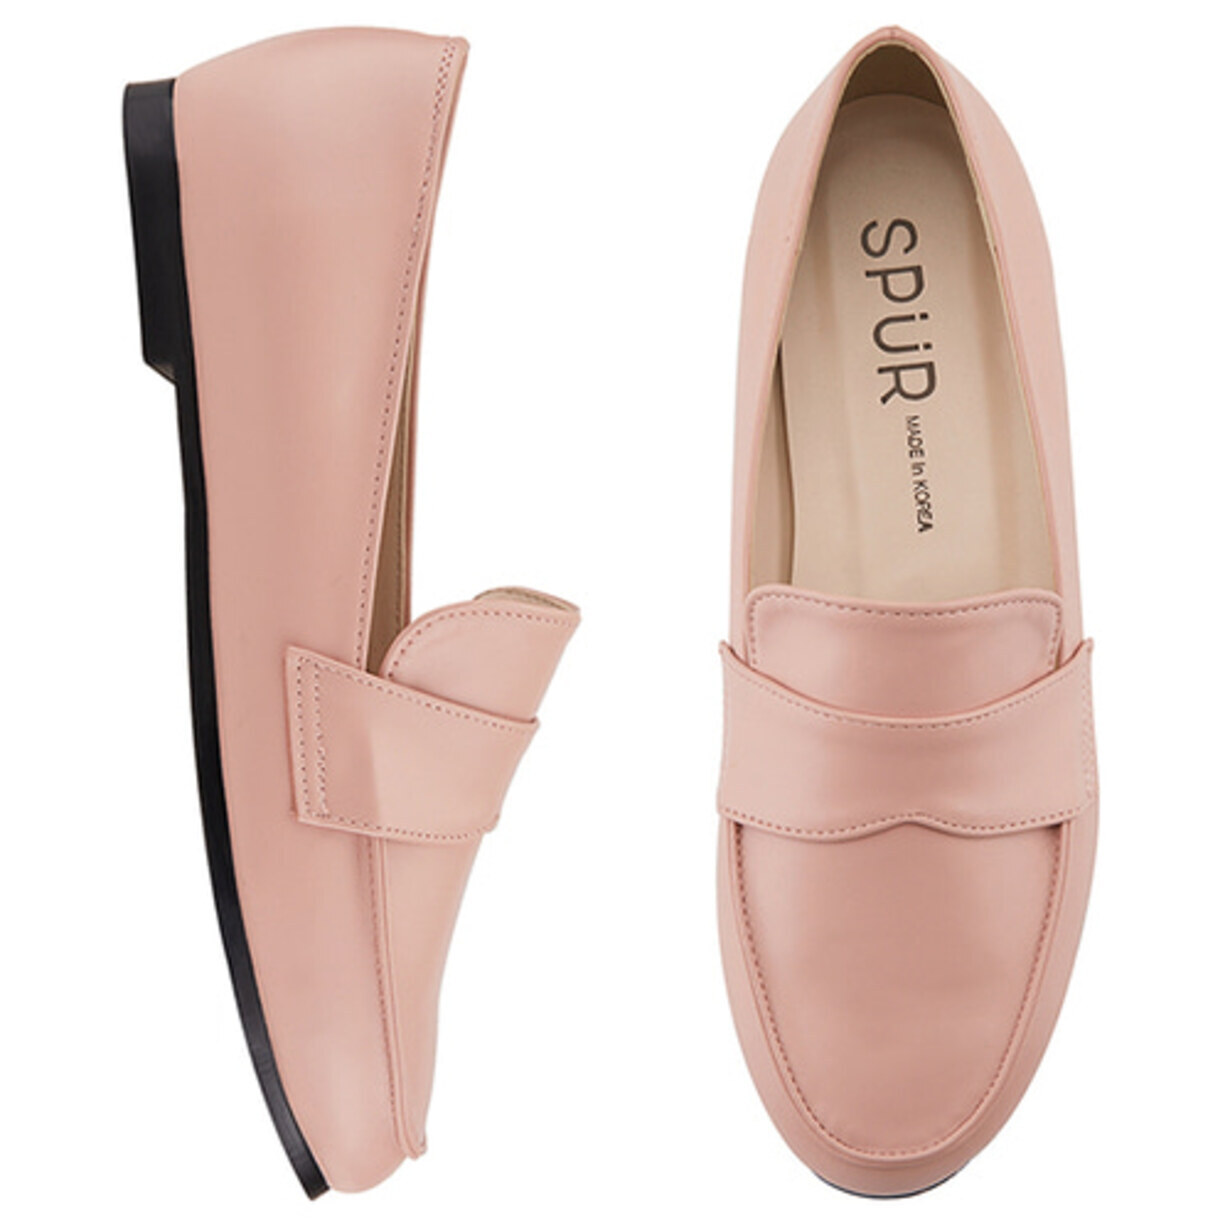 SPUR[스퍼]MS9005 Charming daily Loafer 핑크